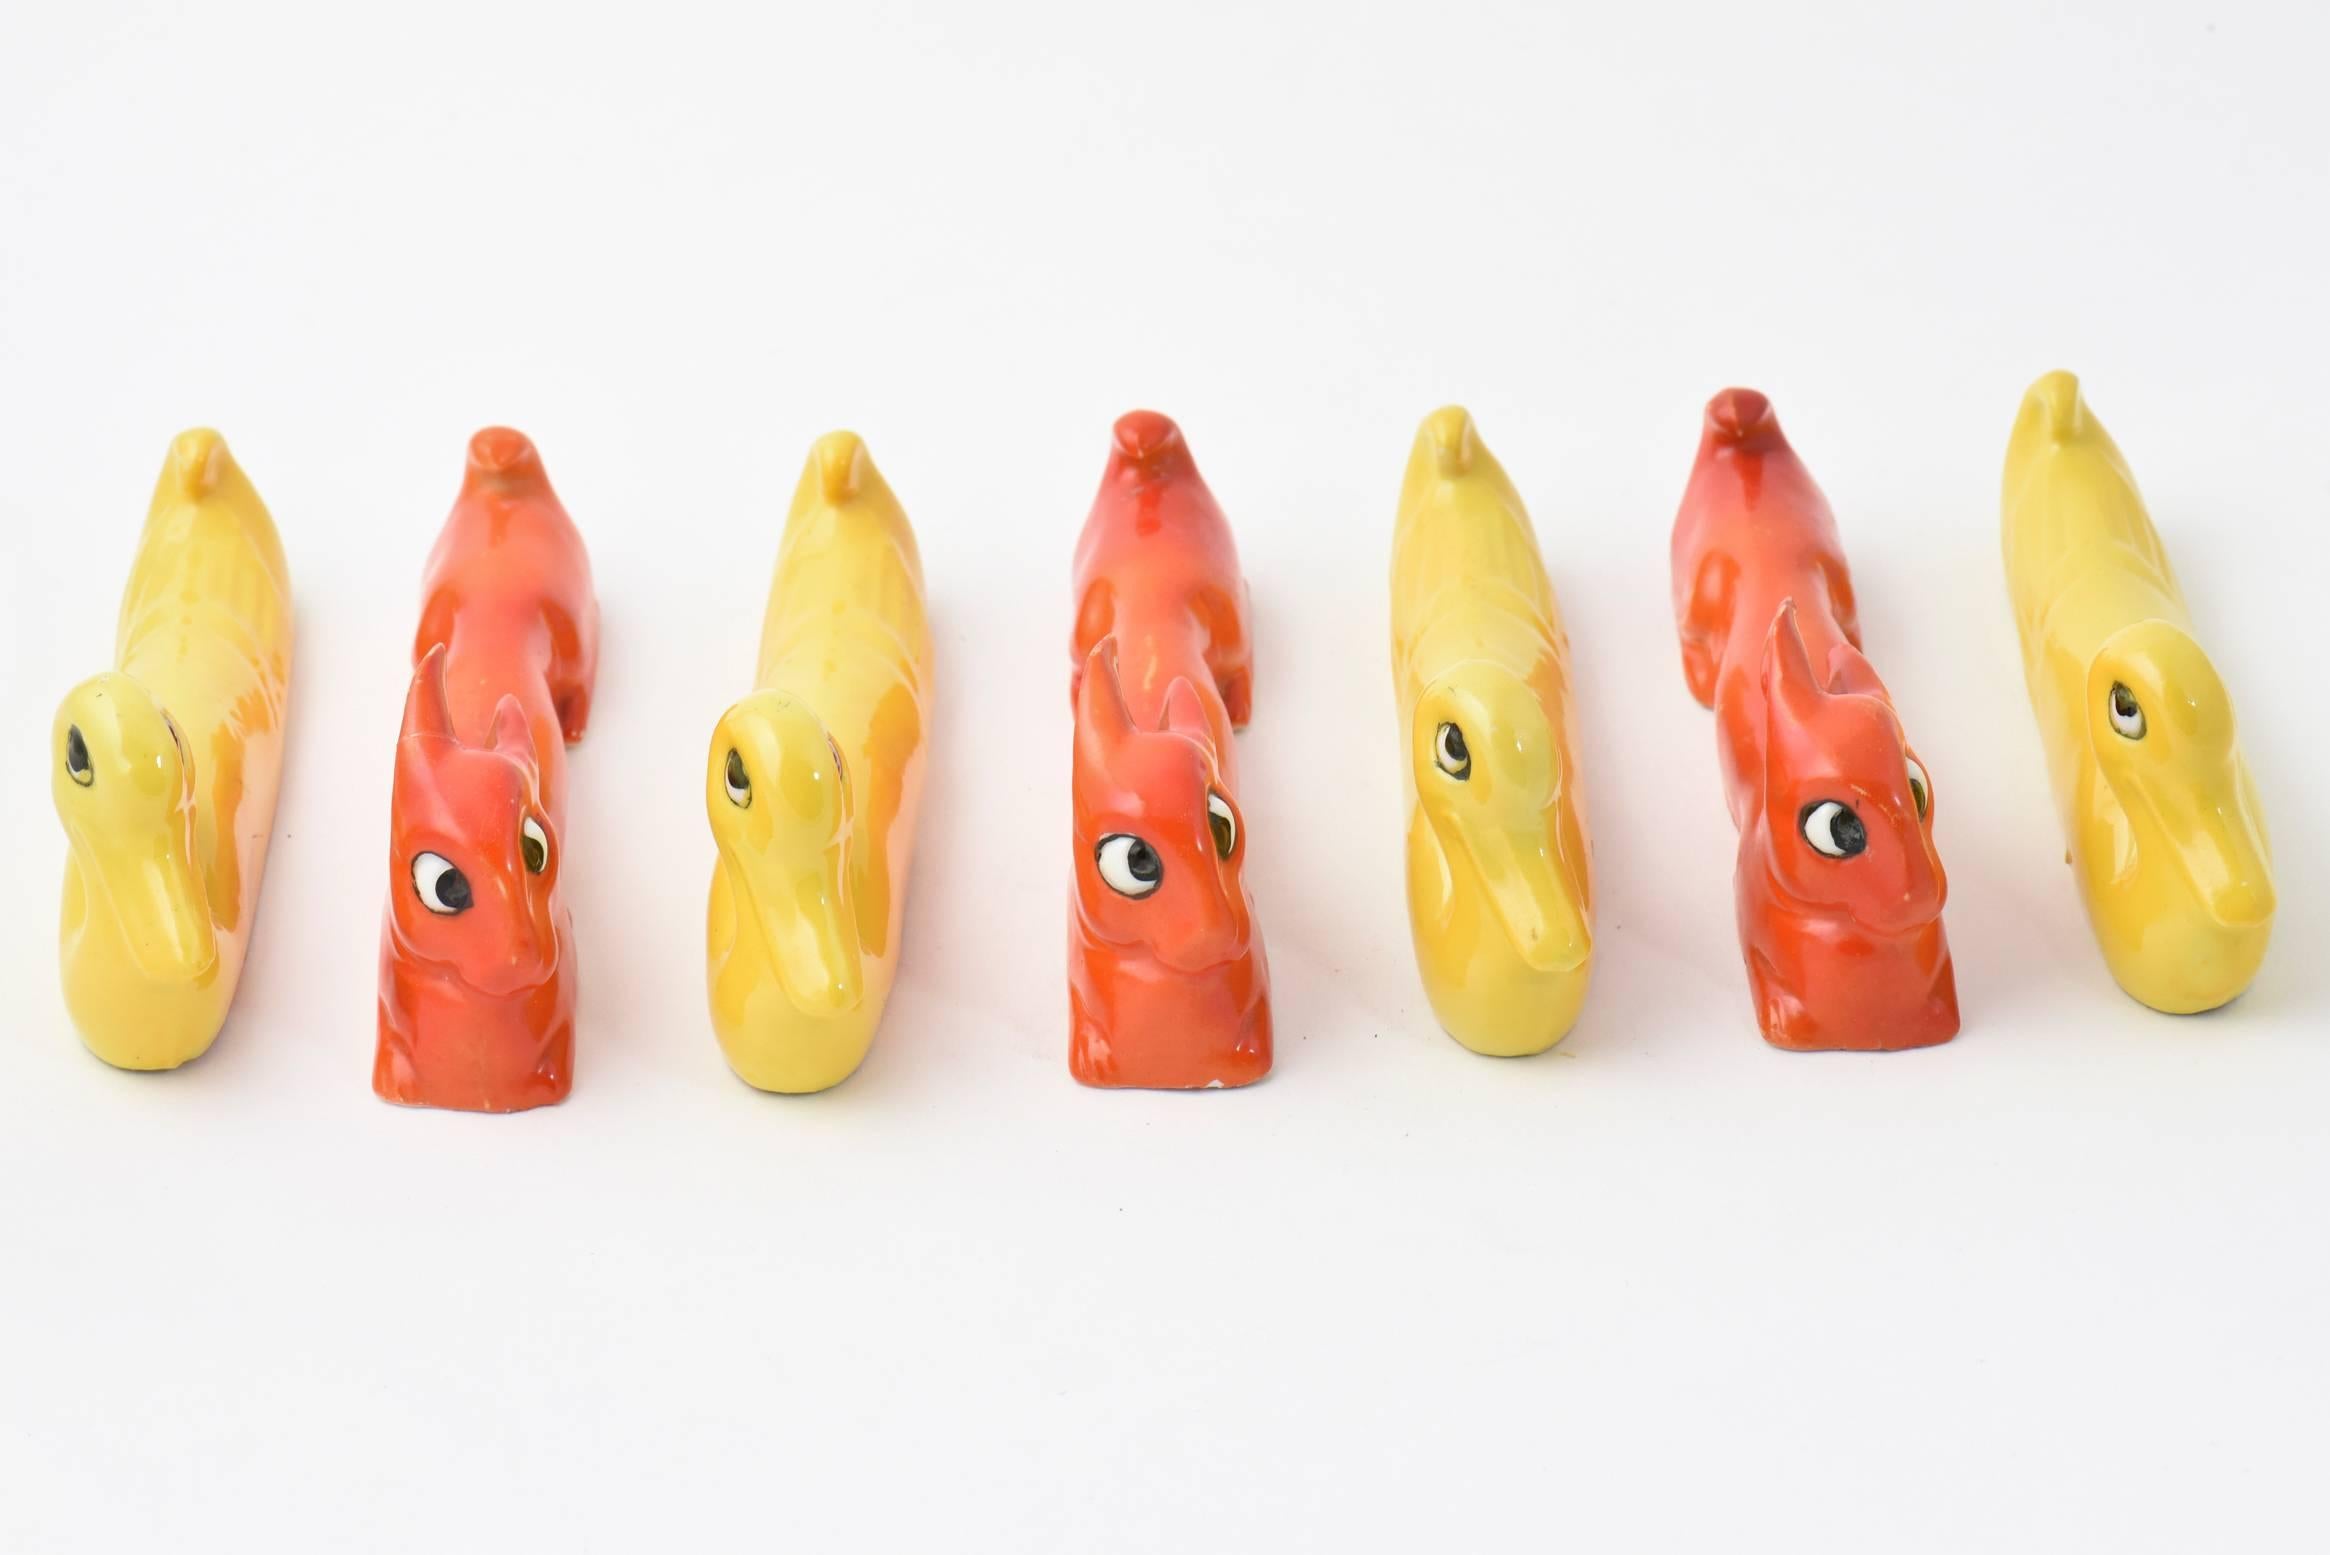 Art Deco ceramic hand-painted knife rests 
Stamped Germany and numbered
Four yellow ducks 
Three orange bunny rabbits.